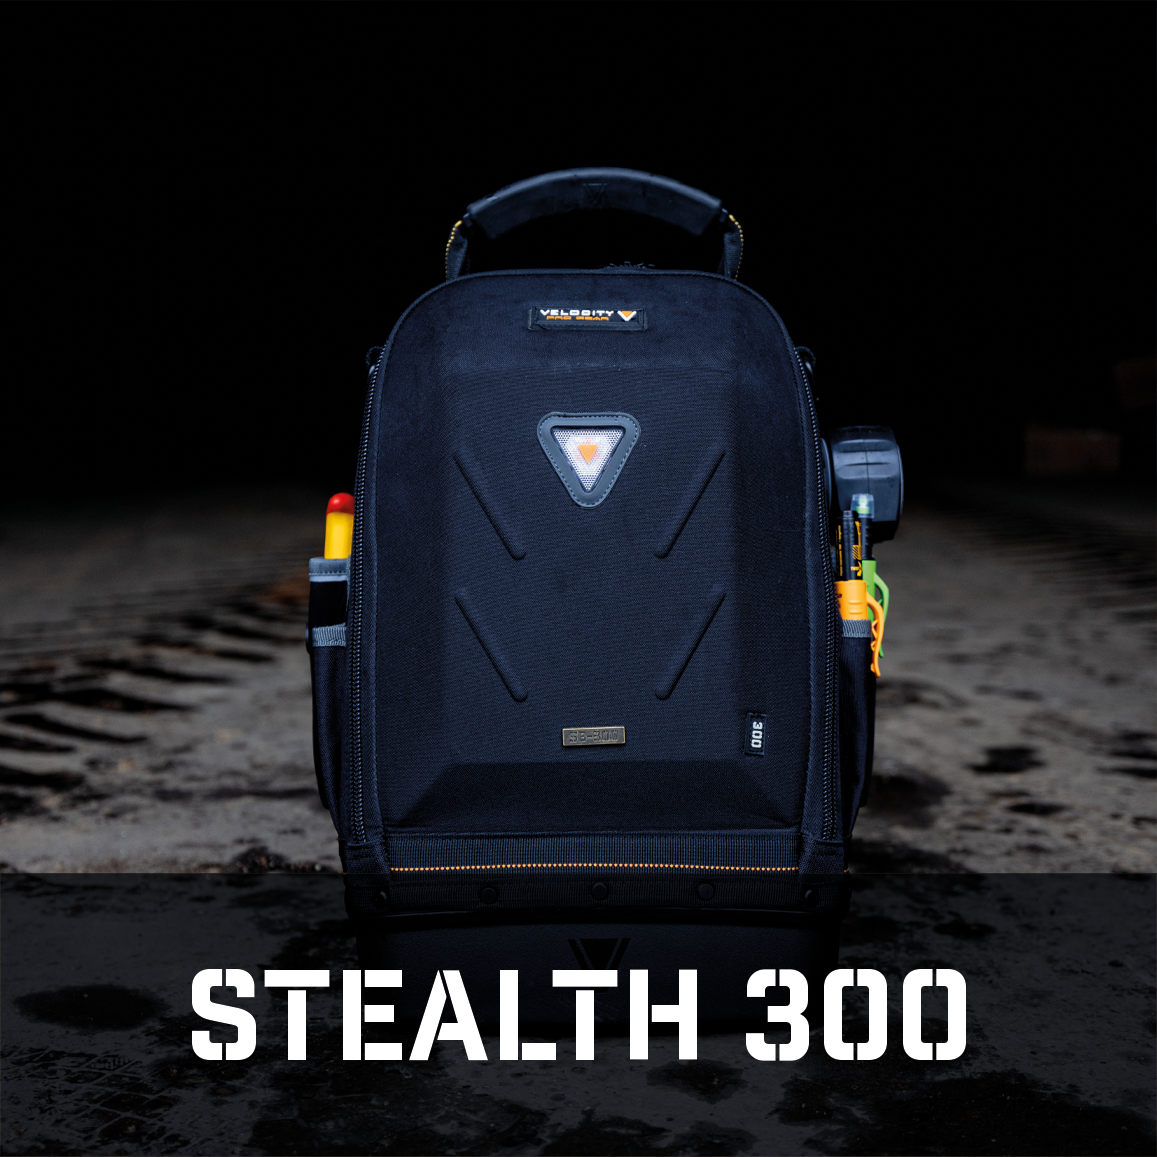 Velocity Stealth 300 Service Tool Bag with tools on the outside sitting in a warehouse with white text